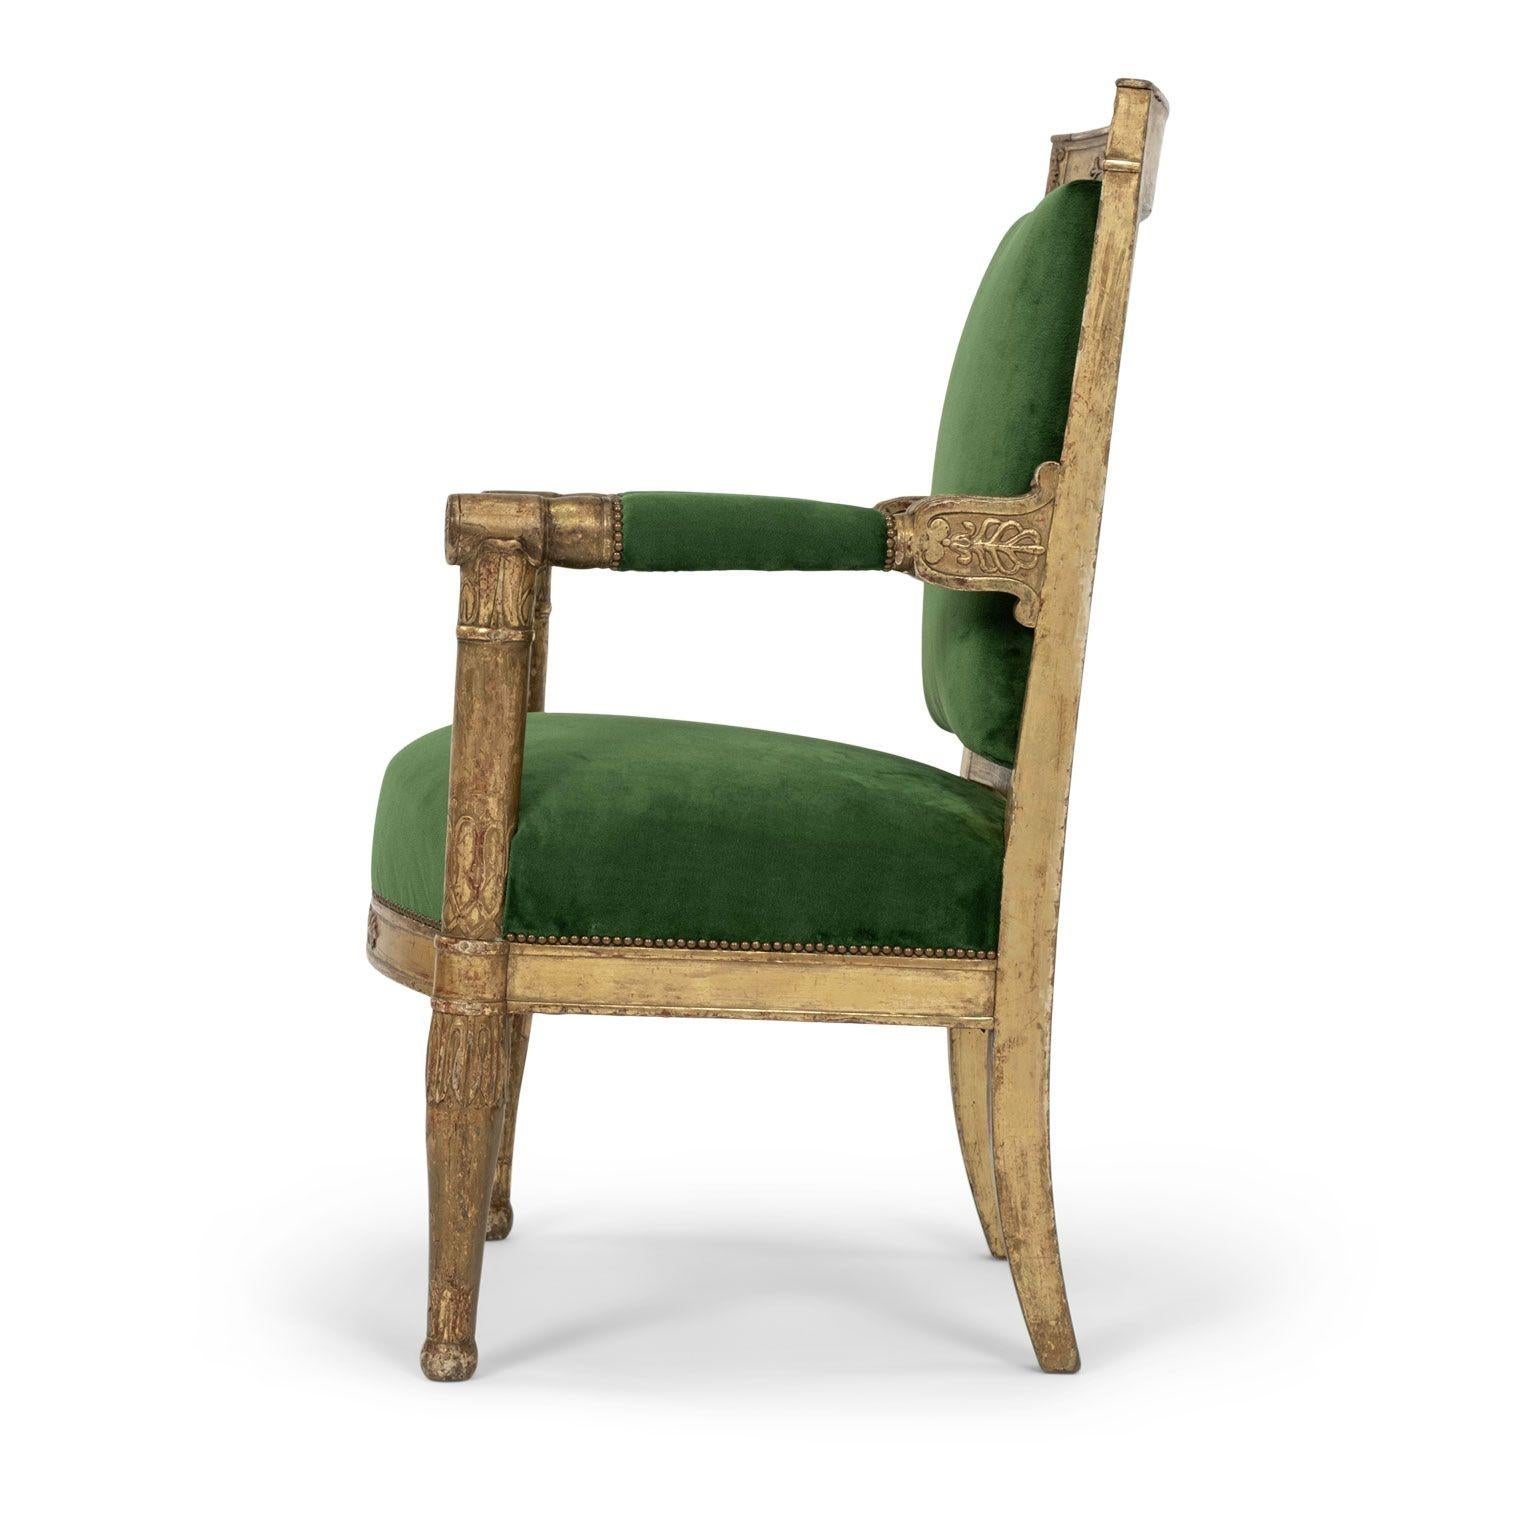 French Empire giltwood fauteuil armchair, circa 1815-1835, newly upholstered in grass-green velvet. Nice, large-scale proportions. Fine quality hand-carved detail. Acanthus and rosette decoration. Original gilt finish (in what appears to be both